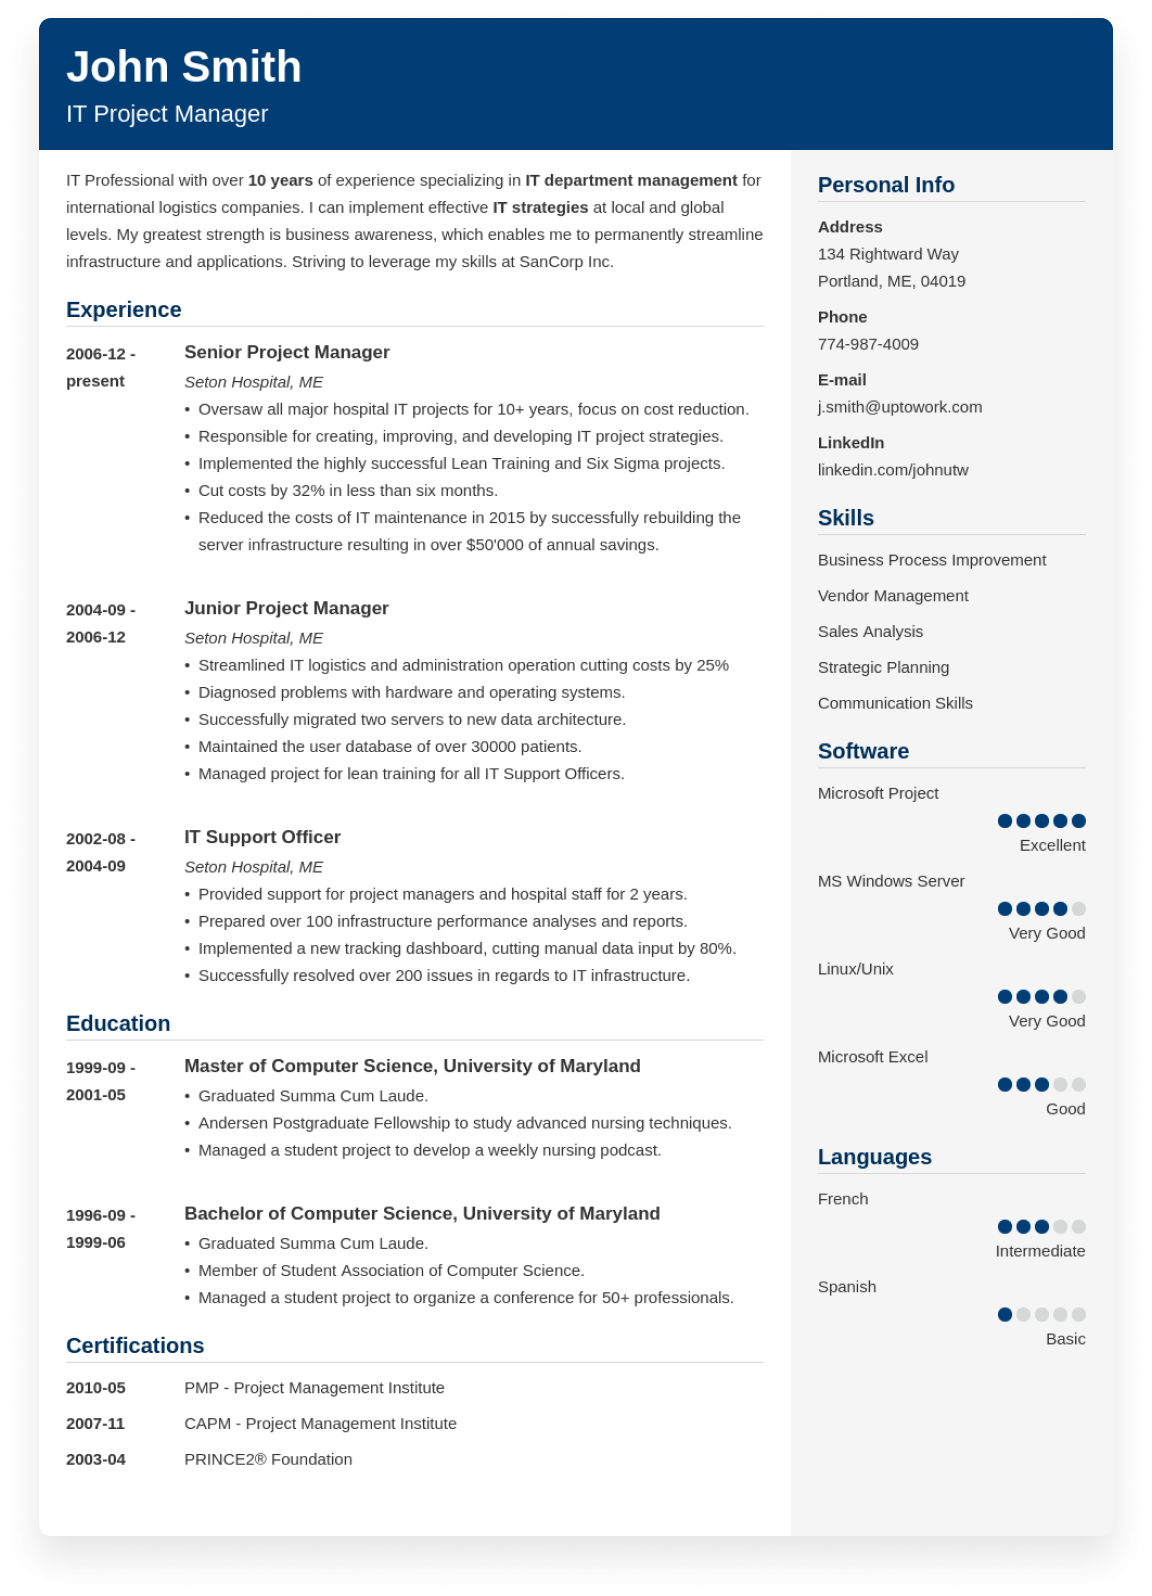 50 Free Resume Examples Professional Sample Resumes For All Jobs